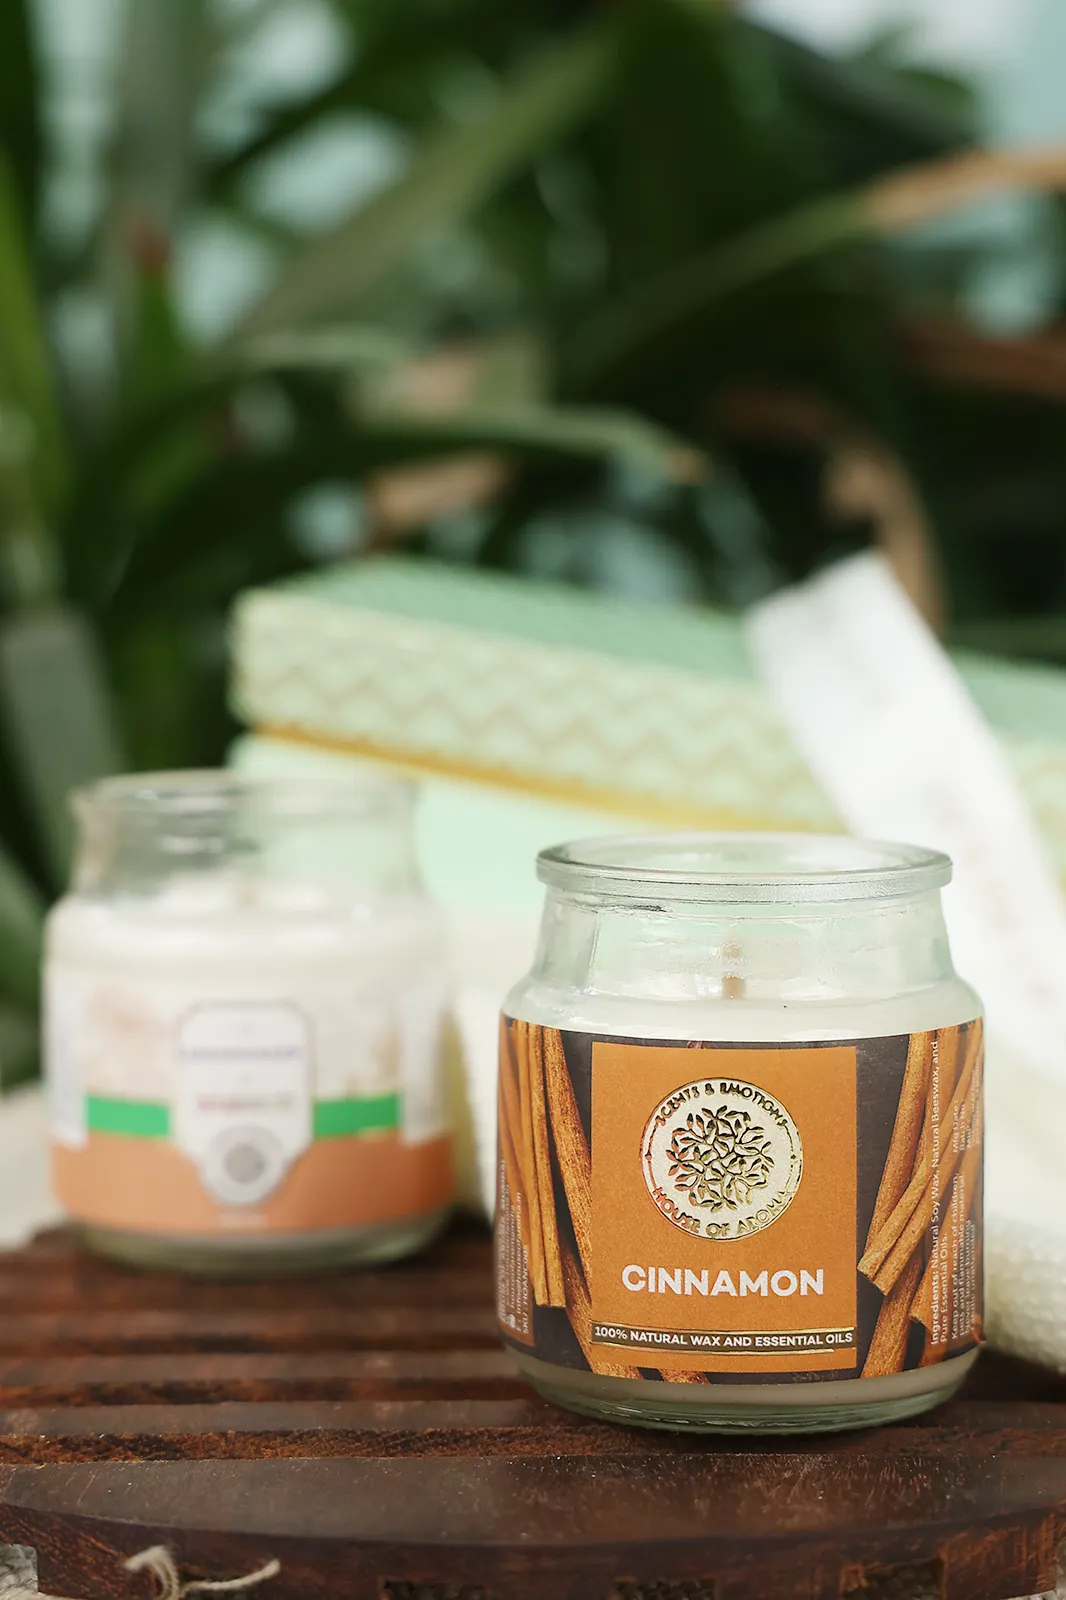 aromatherapy candles combo pack, aromatherapy candles, combo gift pack, fragrance candles online, scented candles combo, aromatherapy with candles, candle aroma, organic candles, aromatherapy candles scents, organic candles, candles for Diwali, natural scented candles, aromatherapy oil candle house of aroma